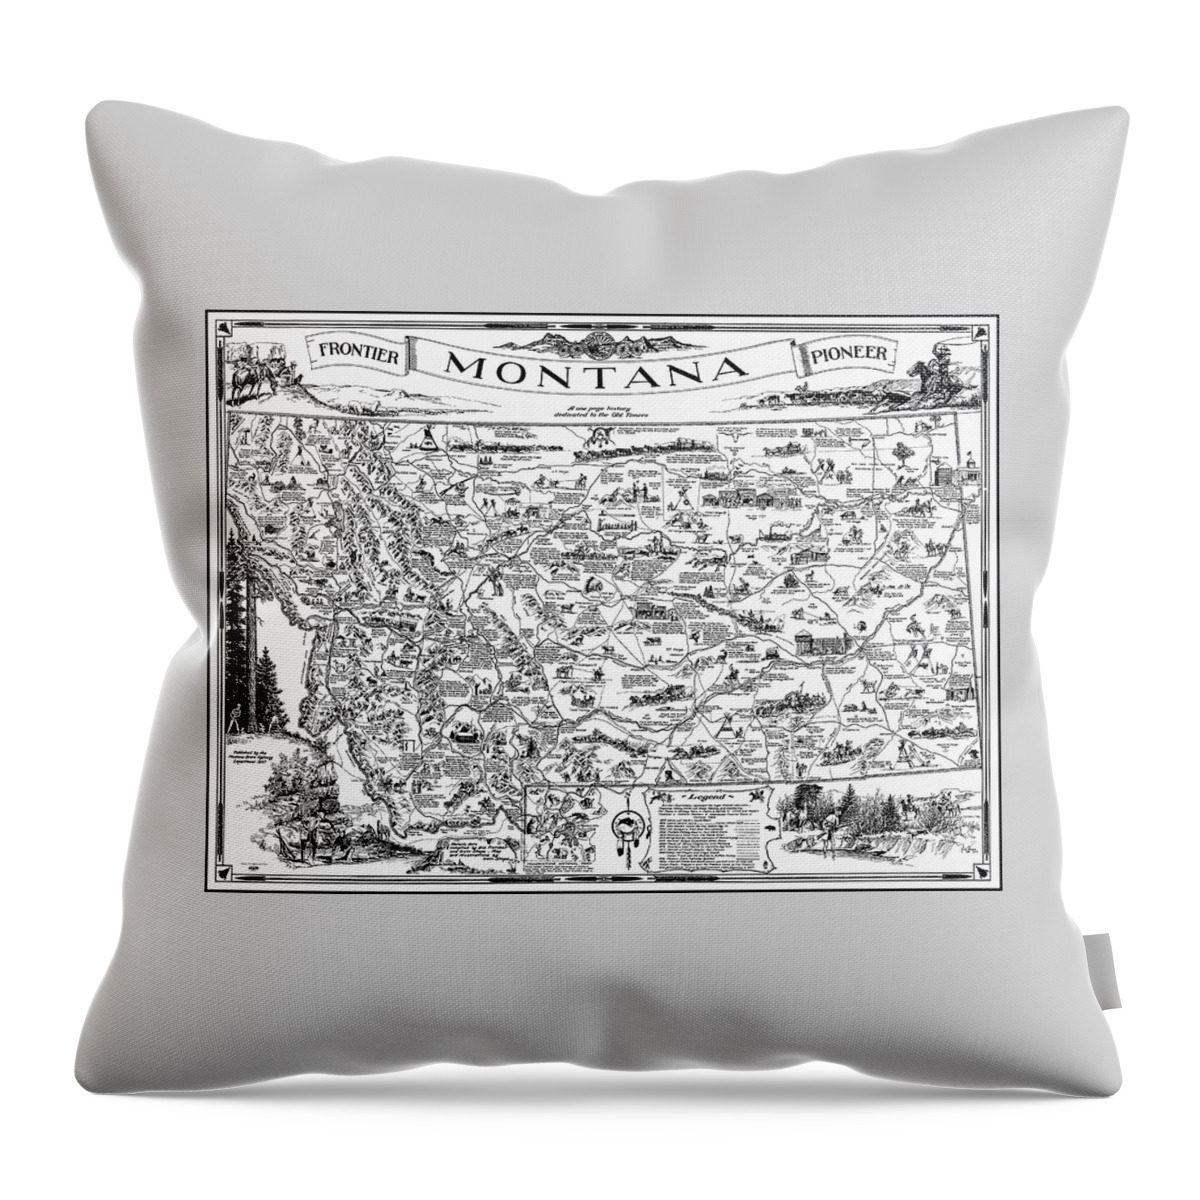 Montana Throw Pillow featuring the photograph Vintage Montana Frontier Pioneer Map 1937 Black and White by Carol Japp